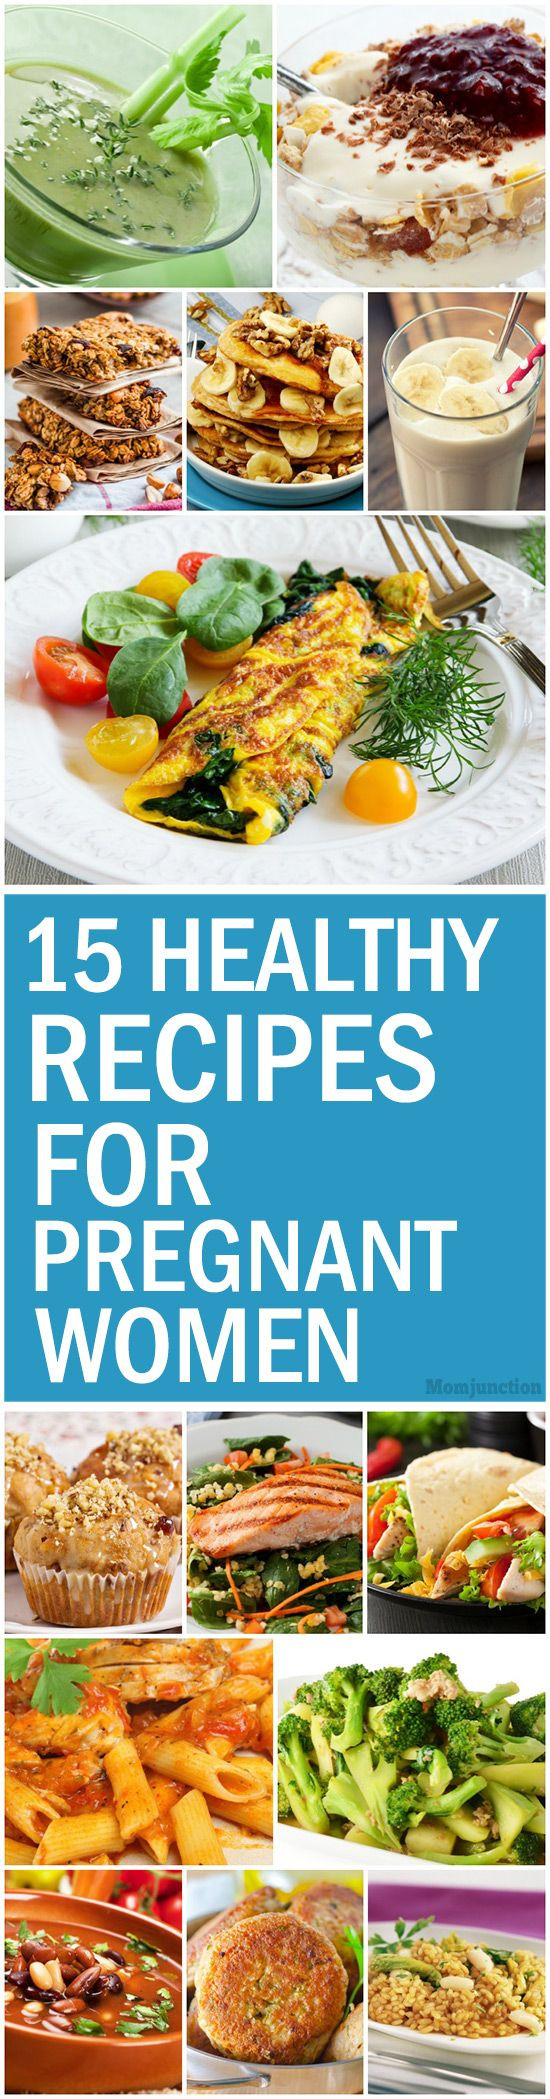 Healthy Pregnancy Dinners
 Top 15 Healthy Recipes For Pregnant Women